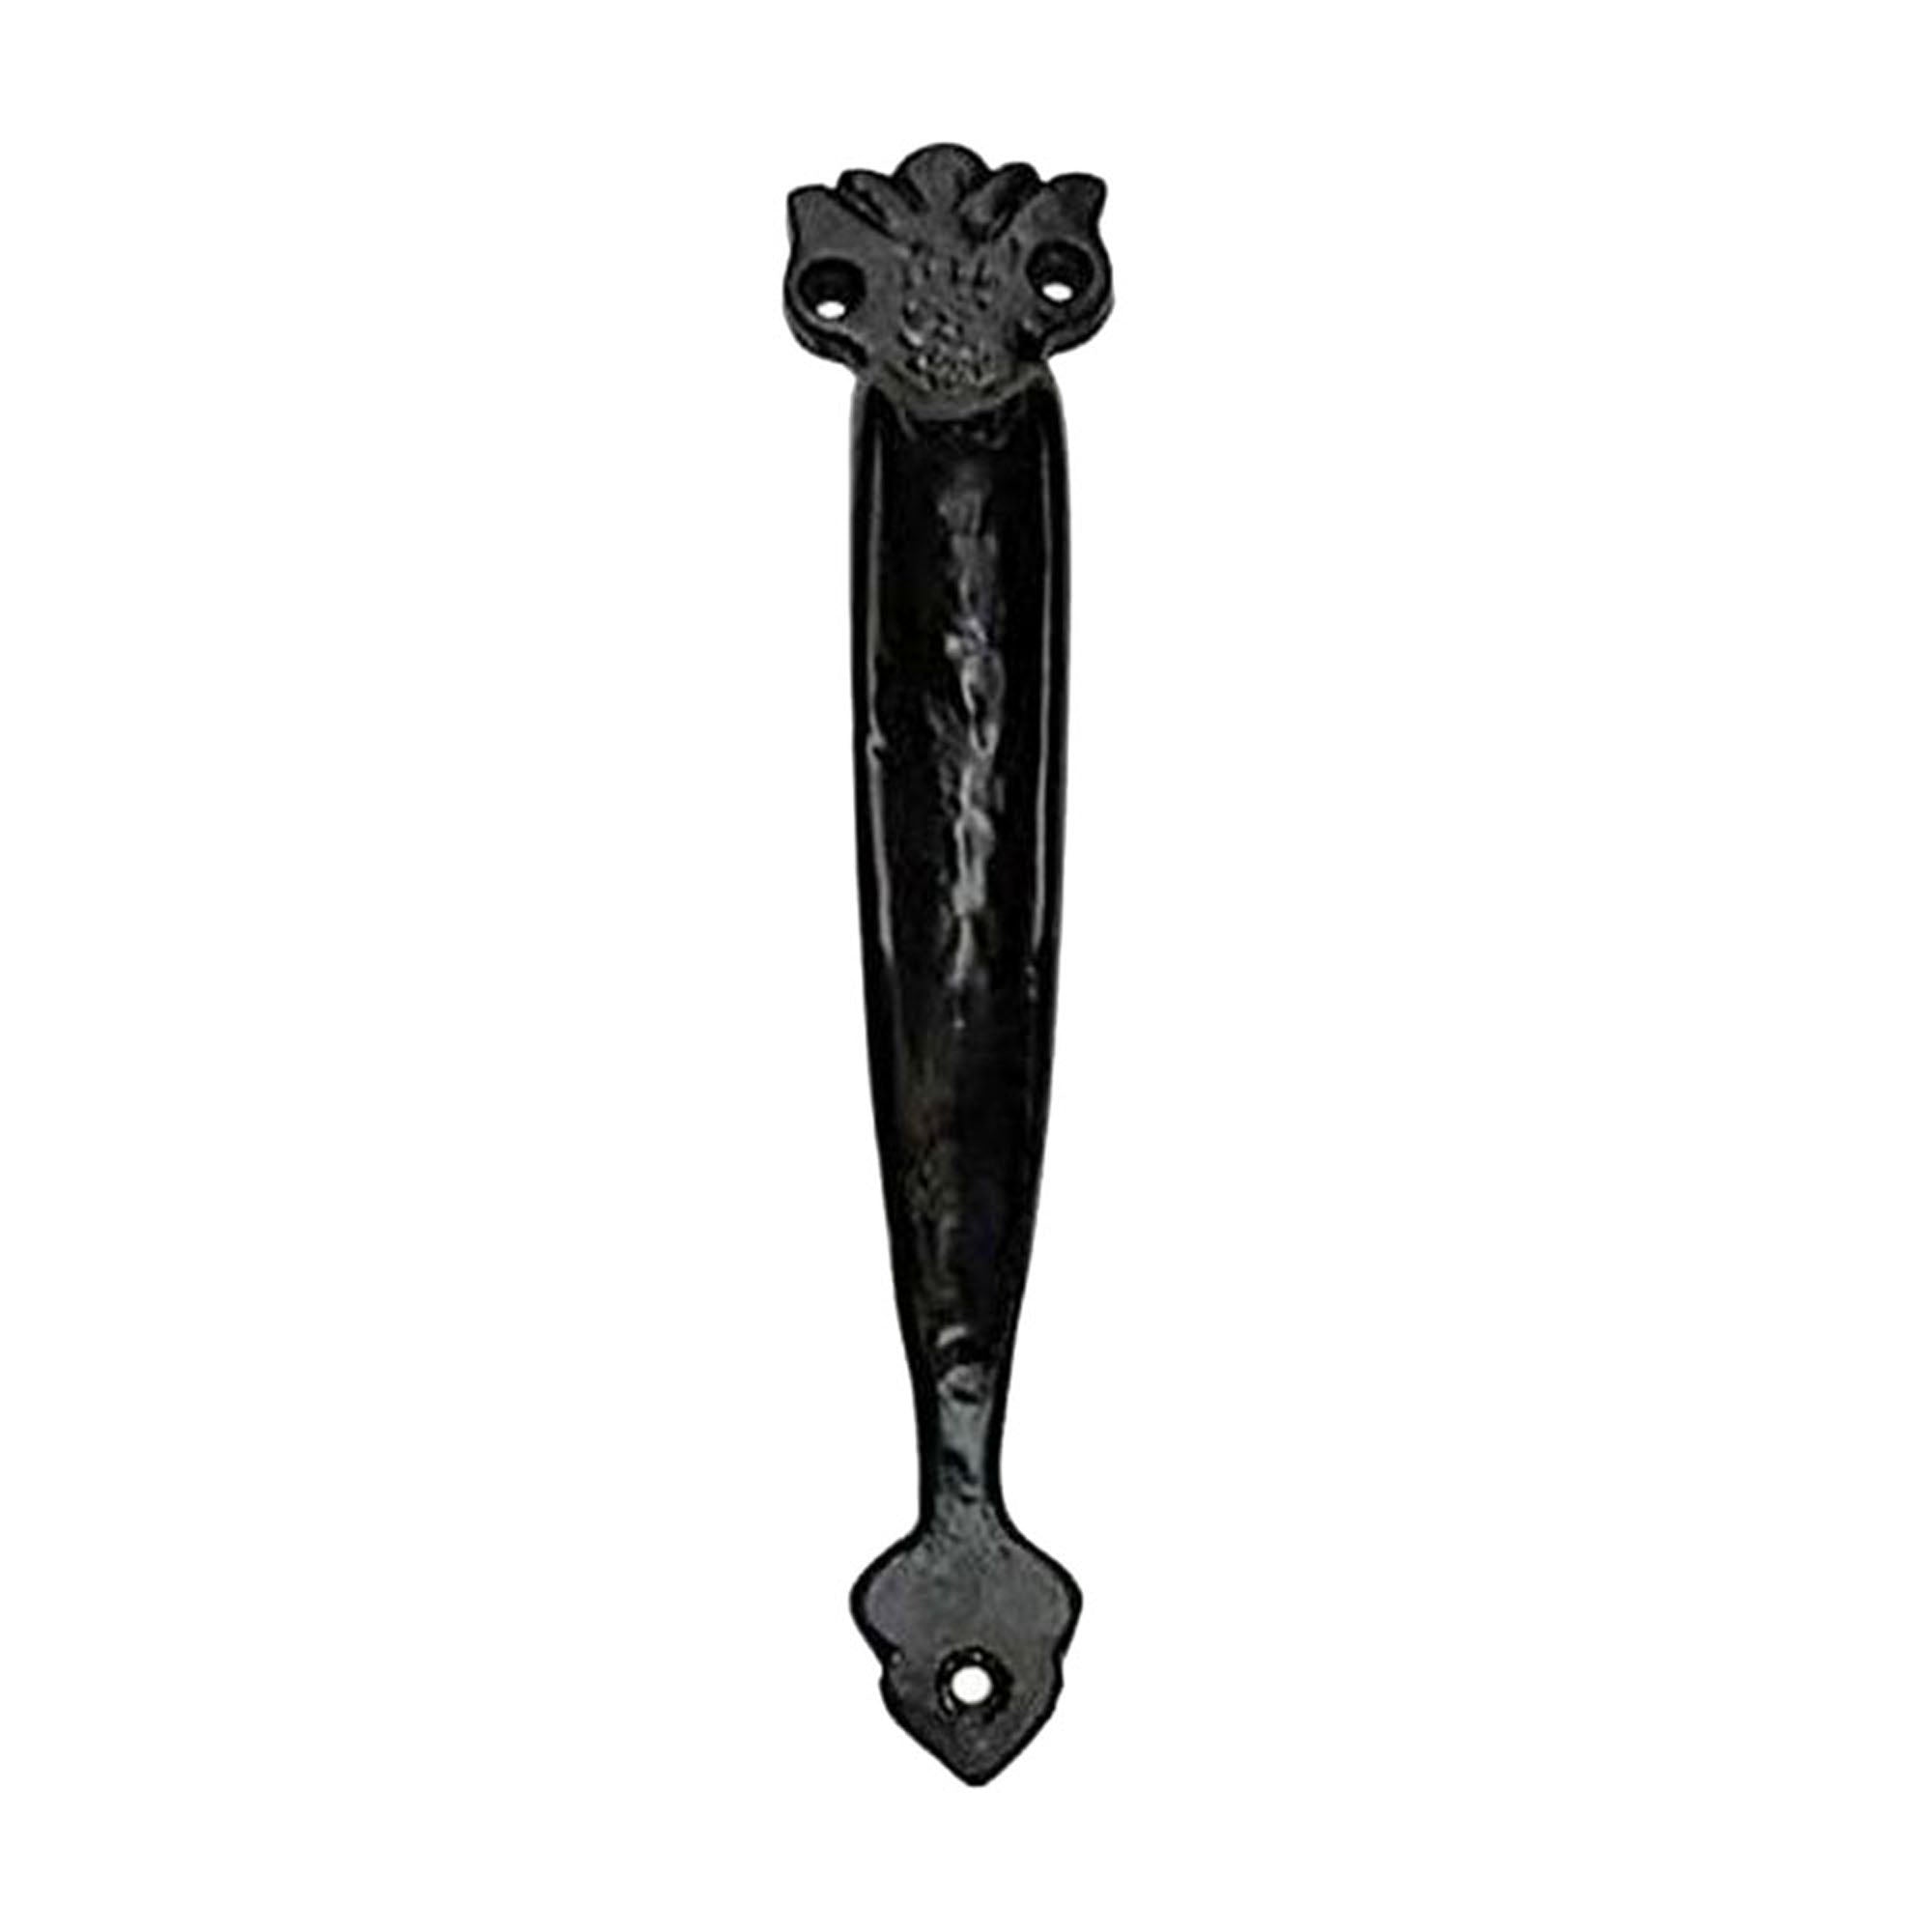 191mm Black Antique Iron Door and Cabinet Pull - Black Powder Coated